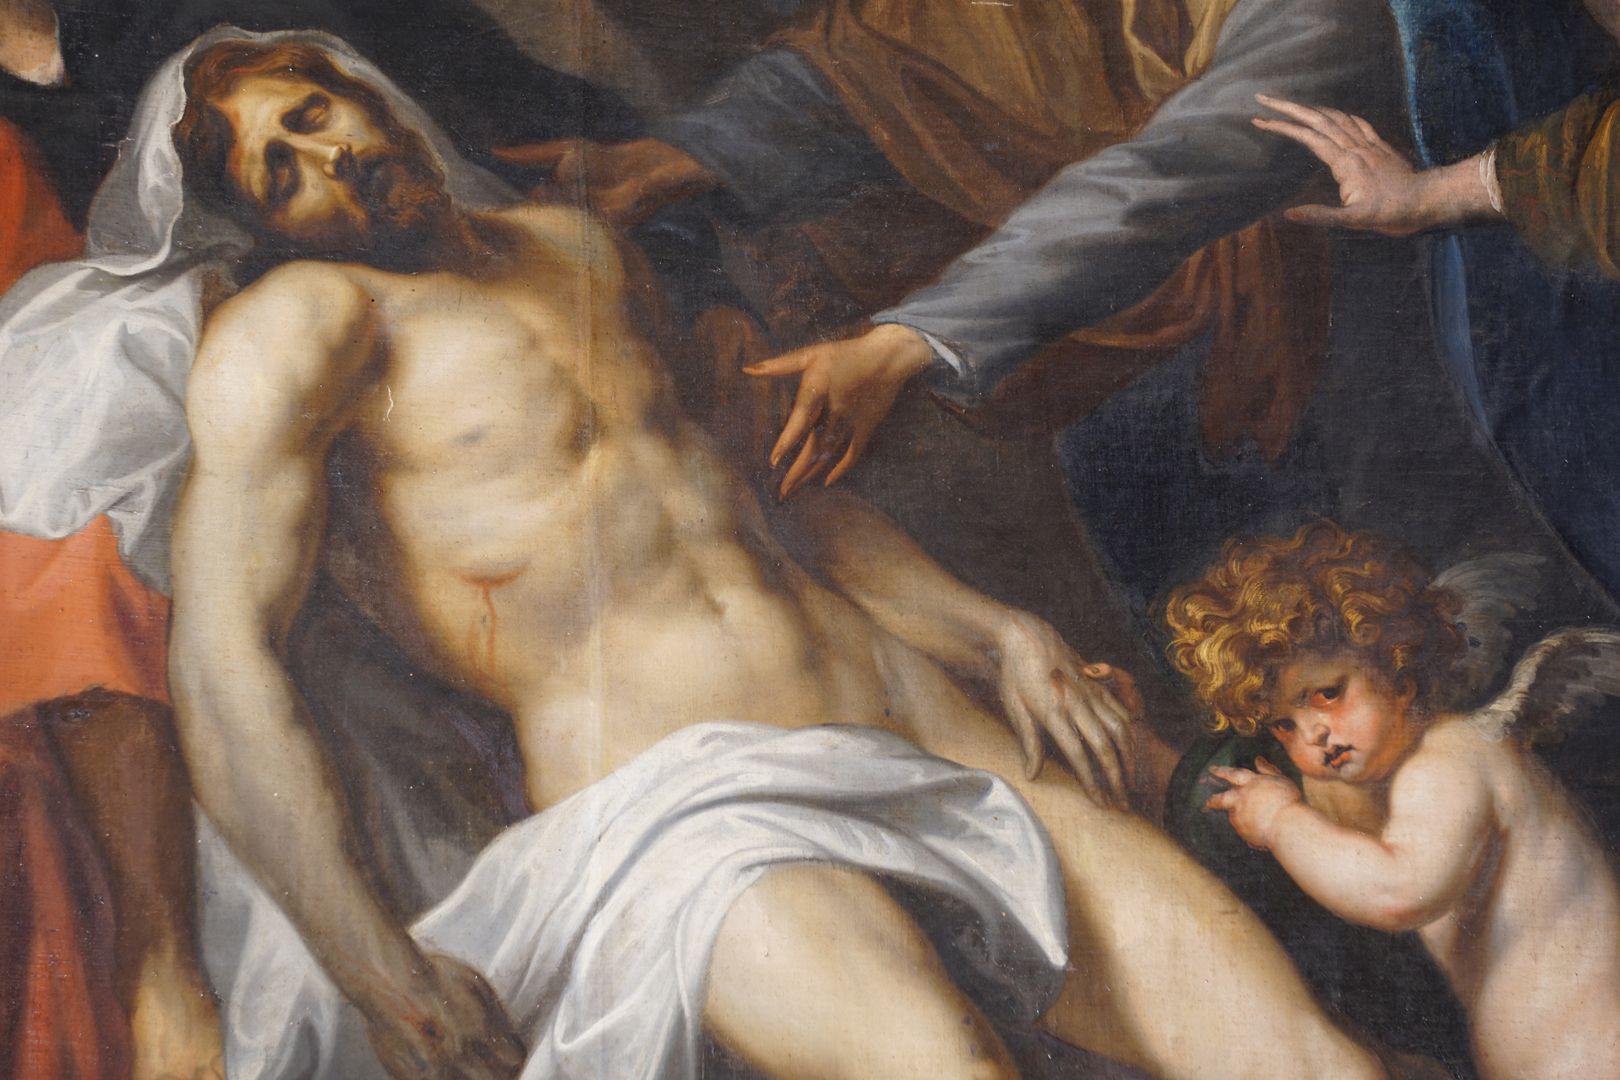 Lamentation of Christ Detail with the body of Jesus